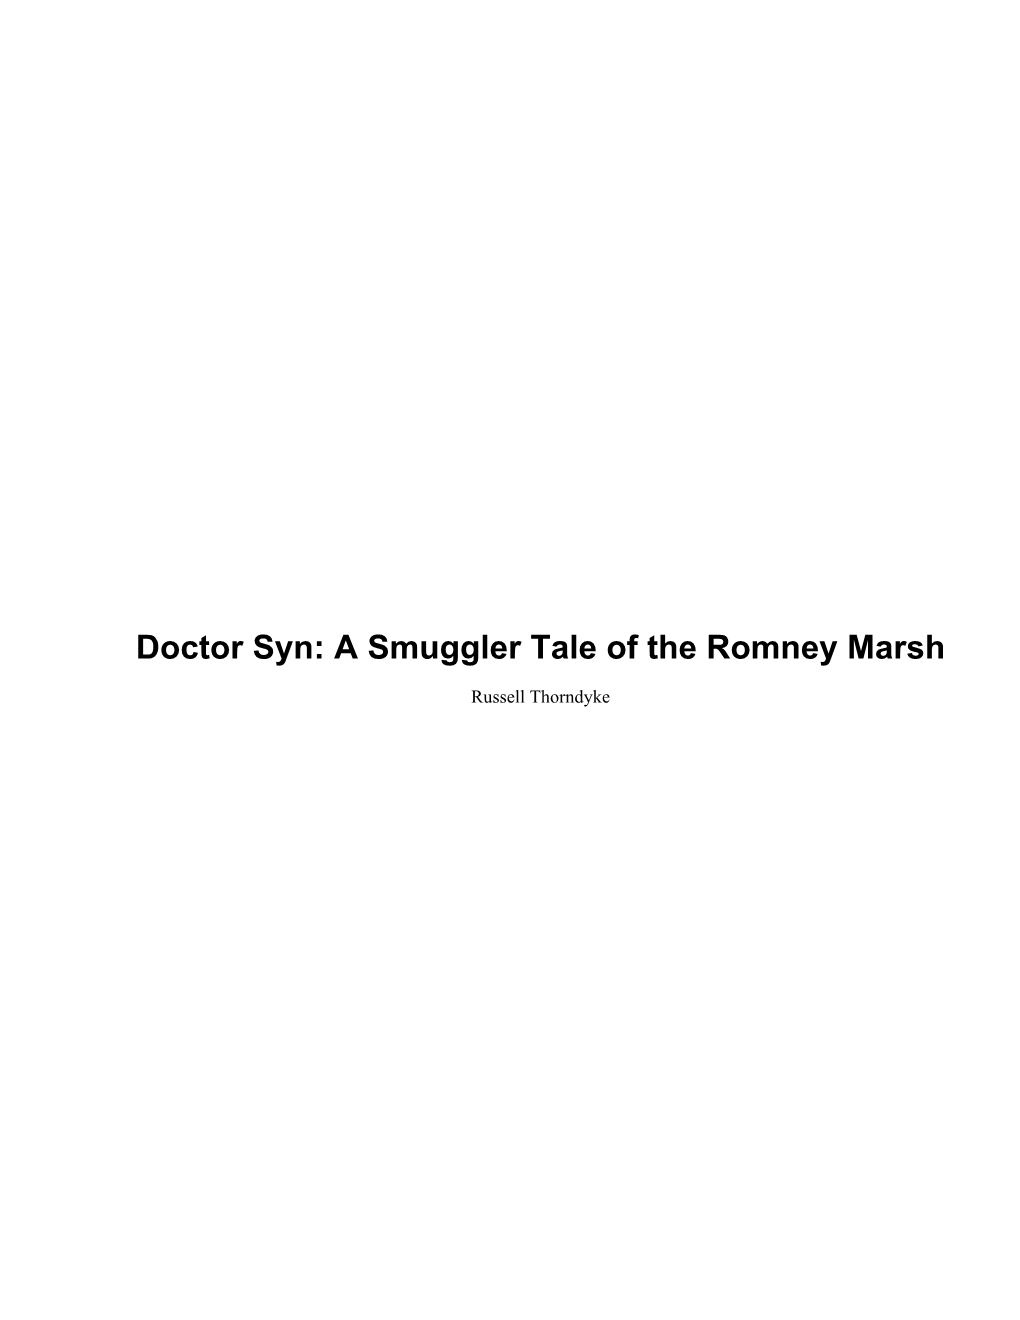 Doctor Syn: a Smuggler Tale of the Romney Marsh